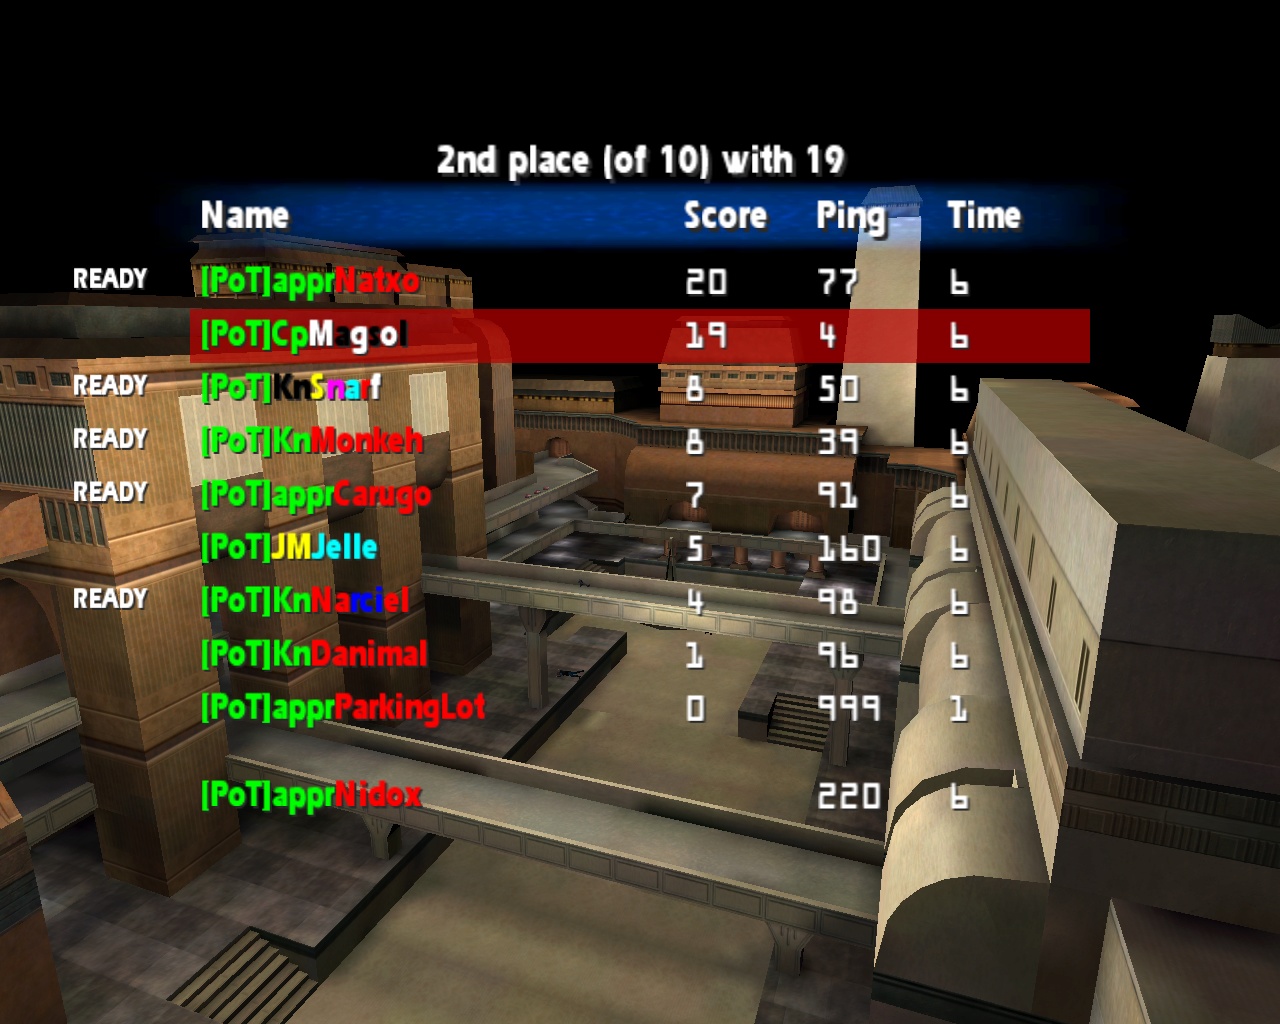 A screenshot of the in-game scoreboard, showing the names of lots of new recruits into PoT.